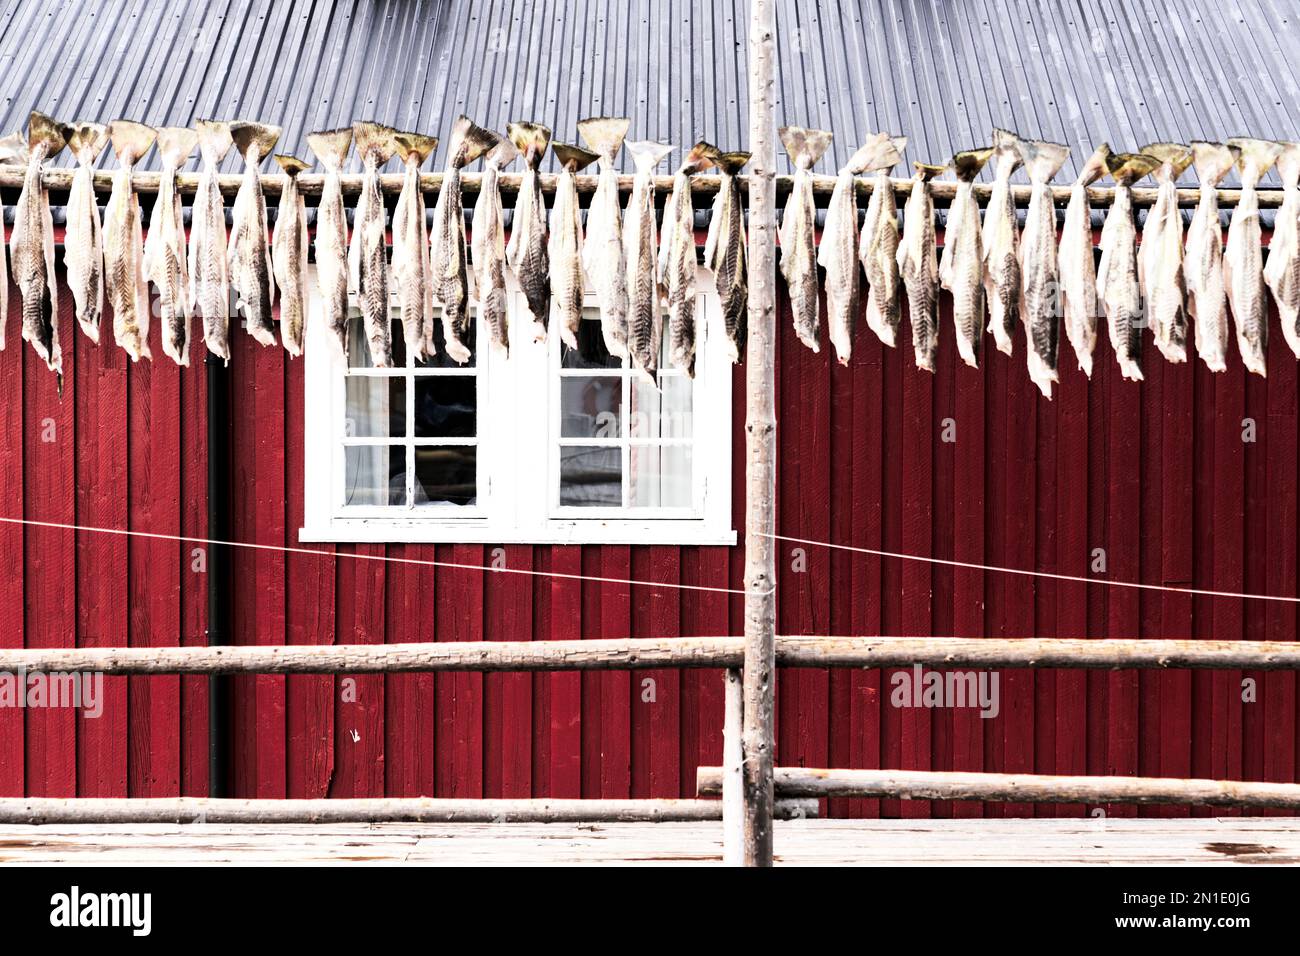 Stockfish in a row hanging to dry outside the traditional Rorbu, Nusfjord, Lofoten, islands, Norway, Scandinavia, Europe Stock Photo